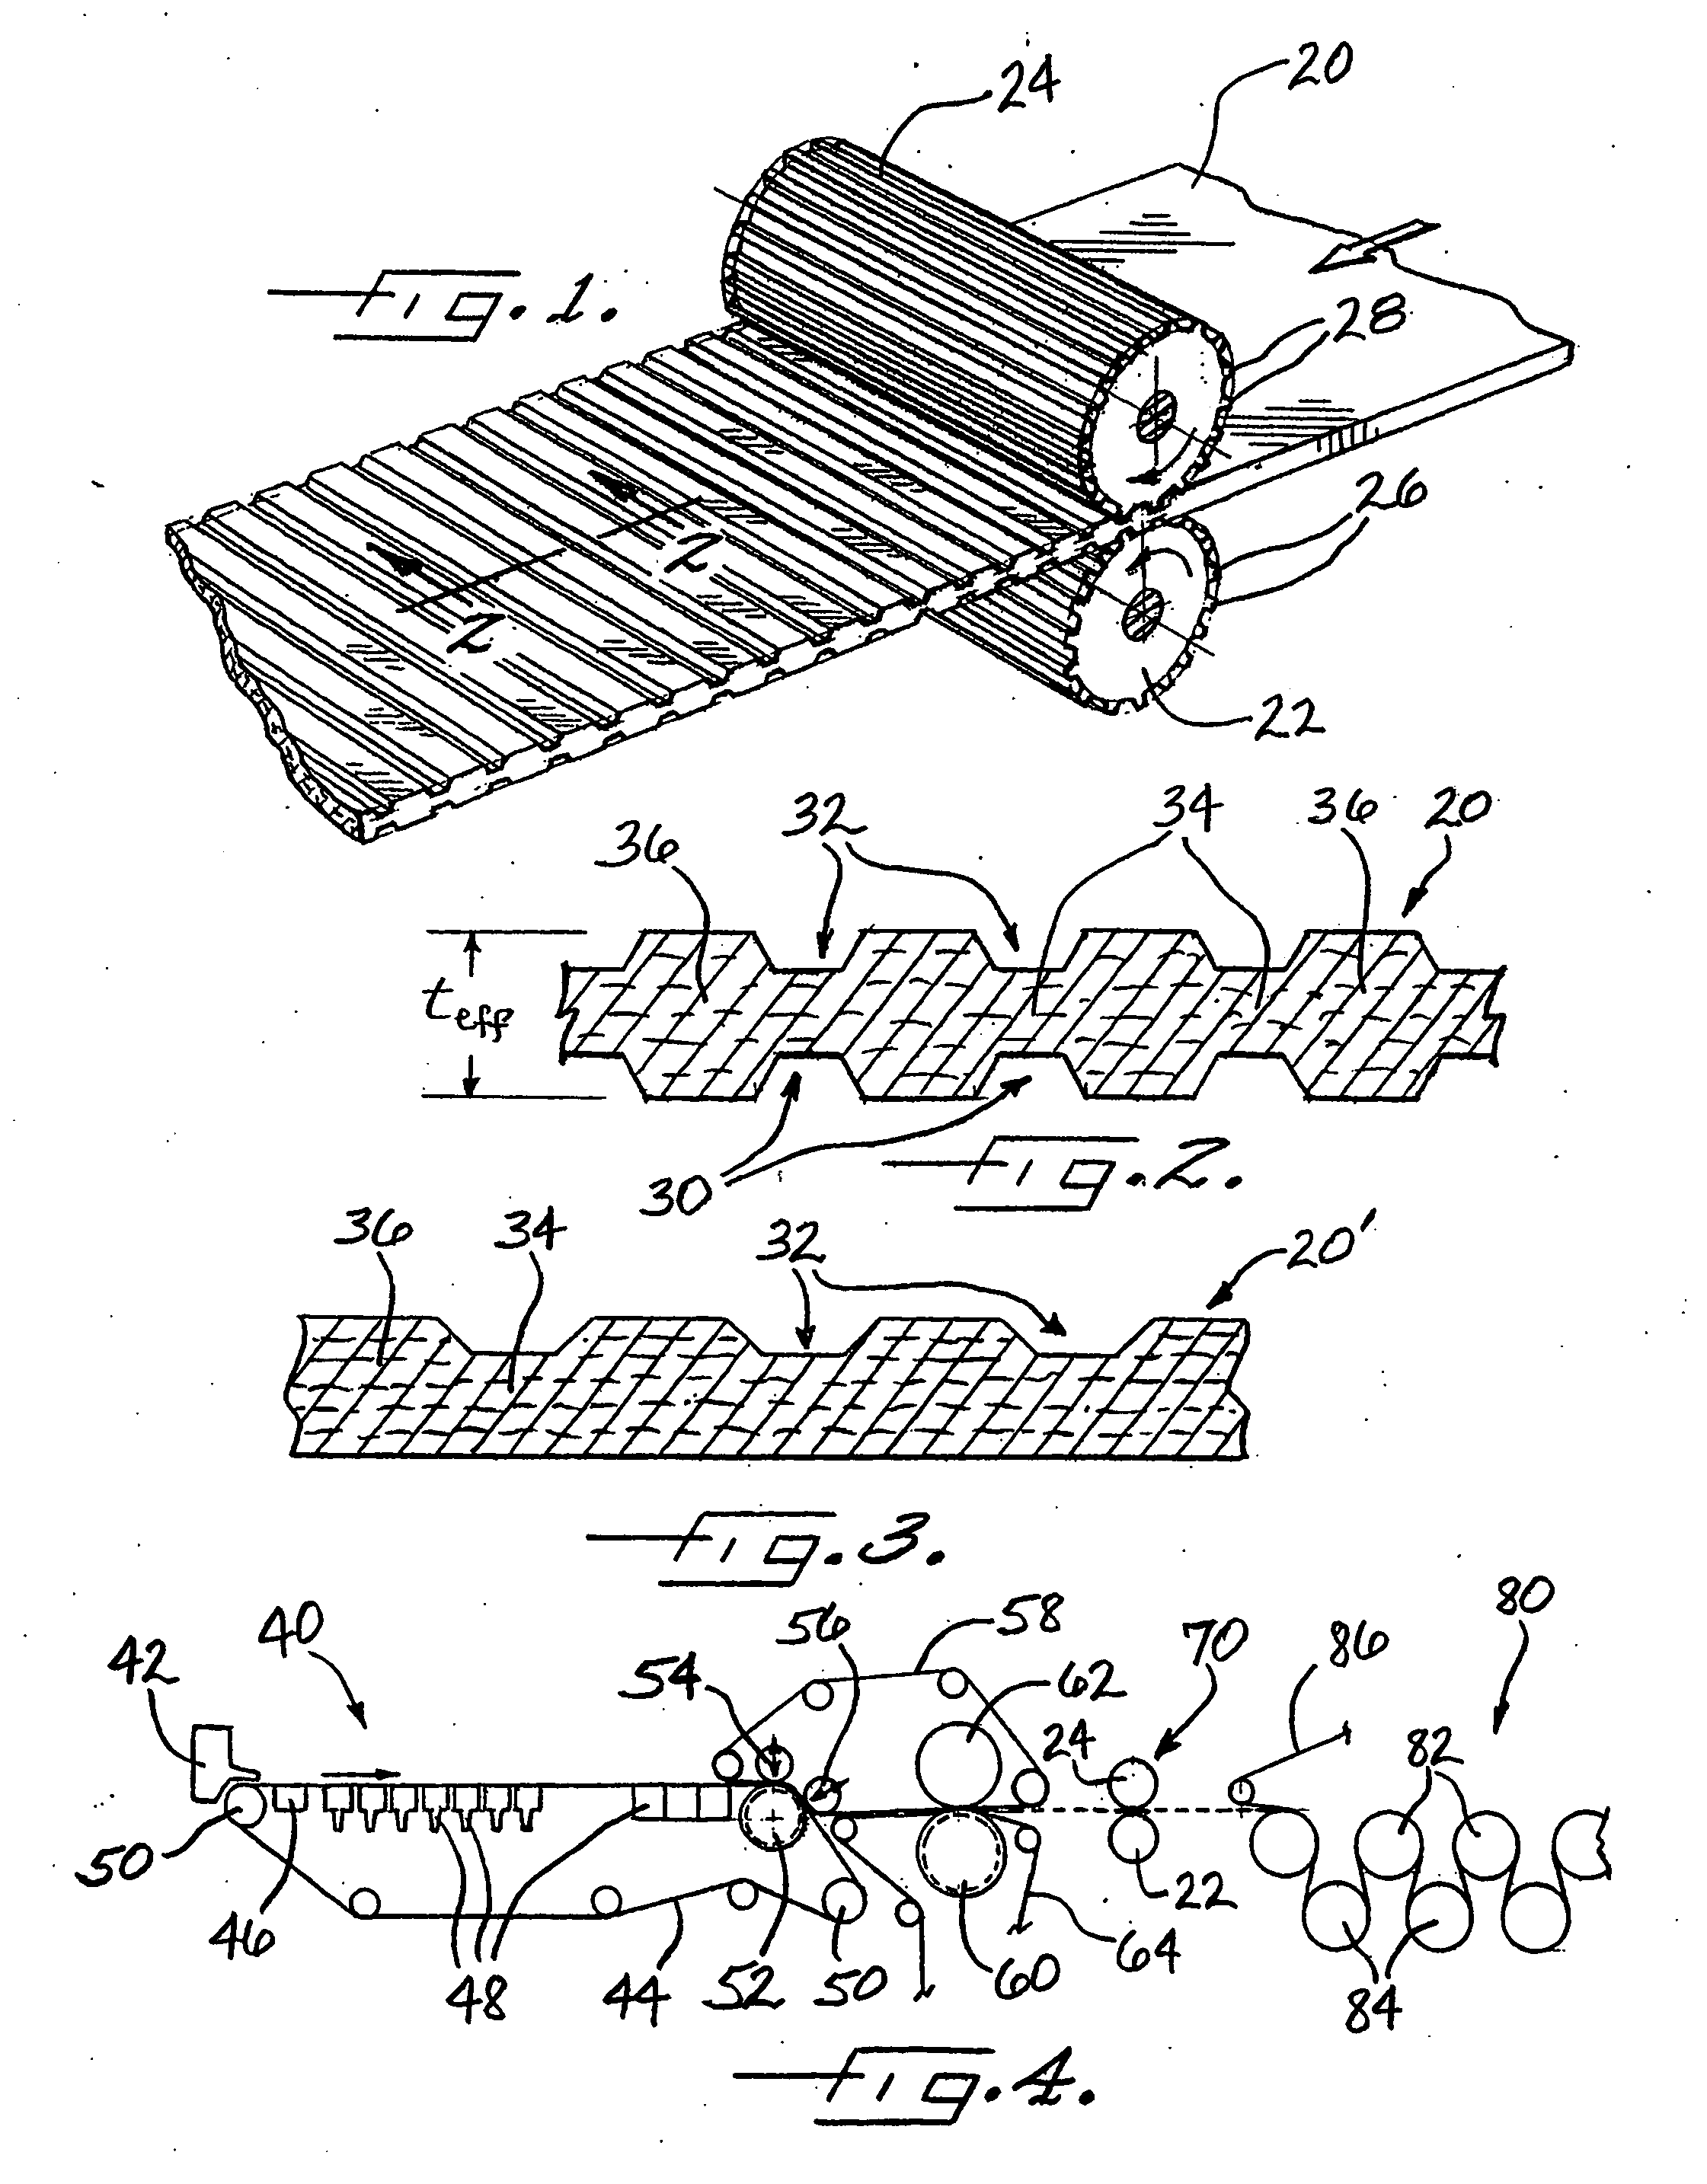 Paperboard with discrete densified regions, process for making same, and laminate incorporating same